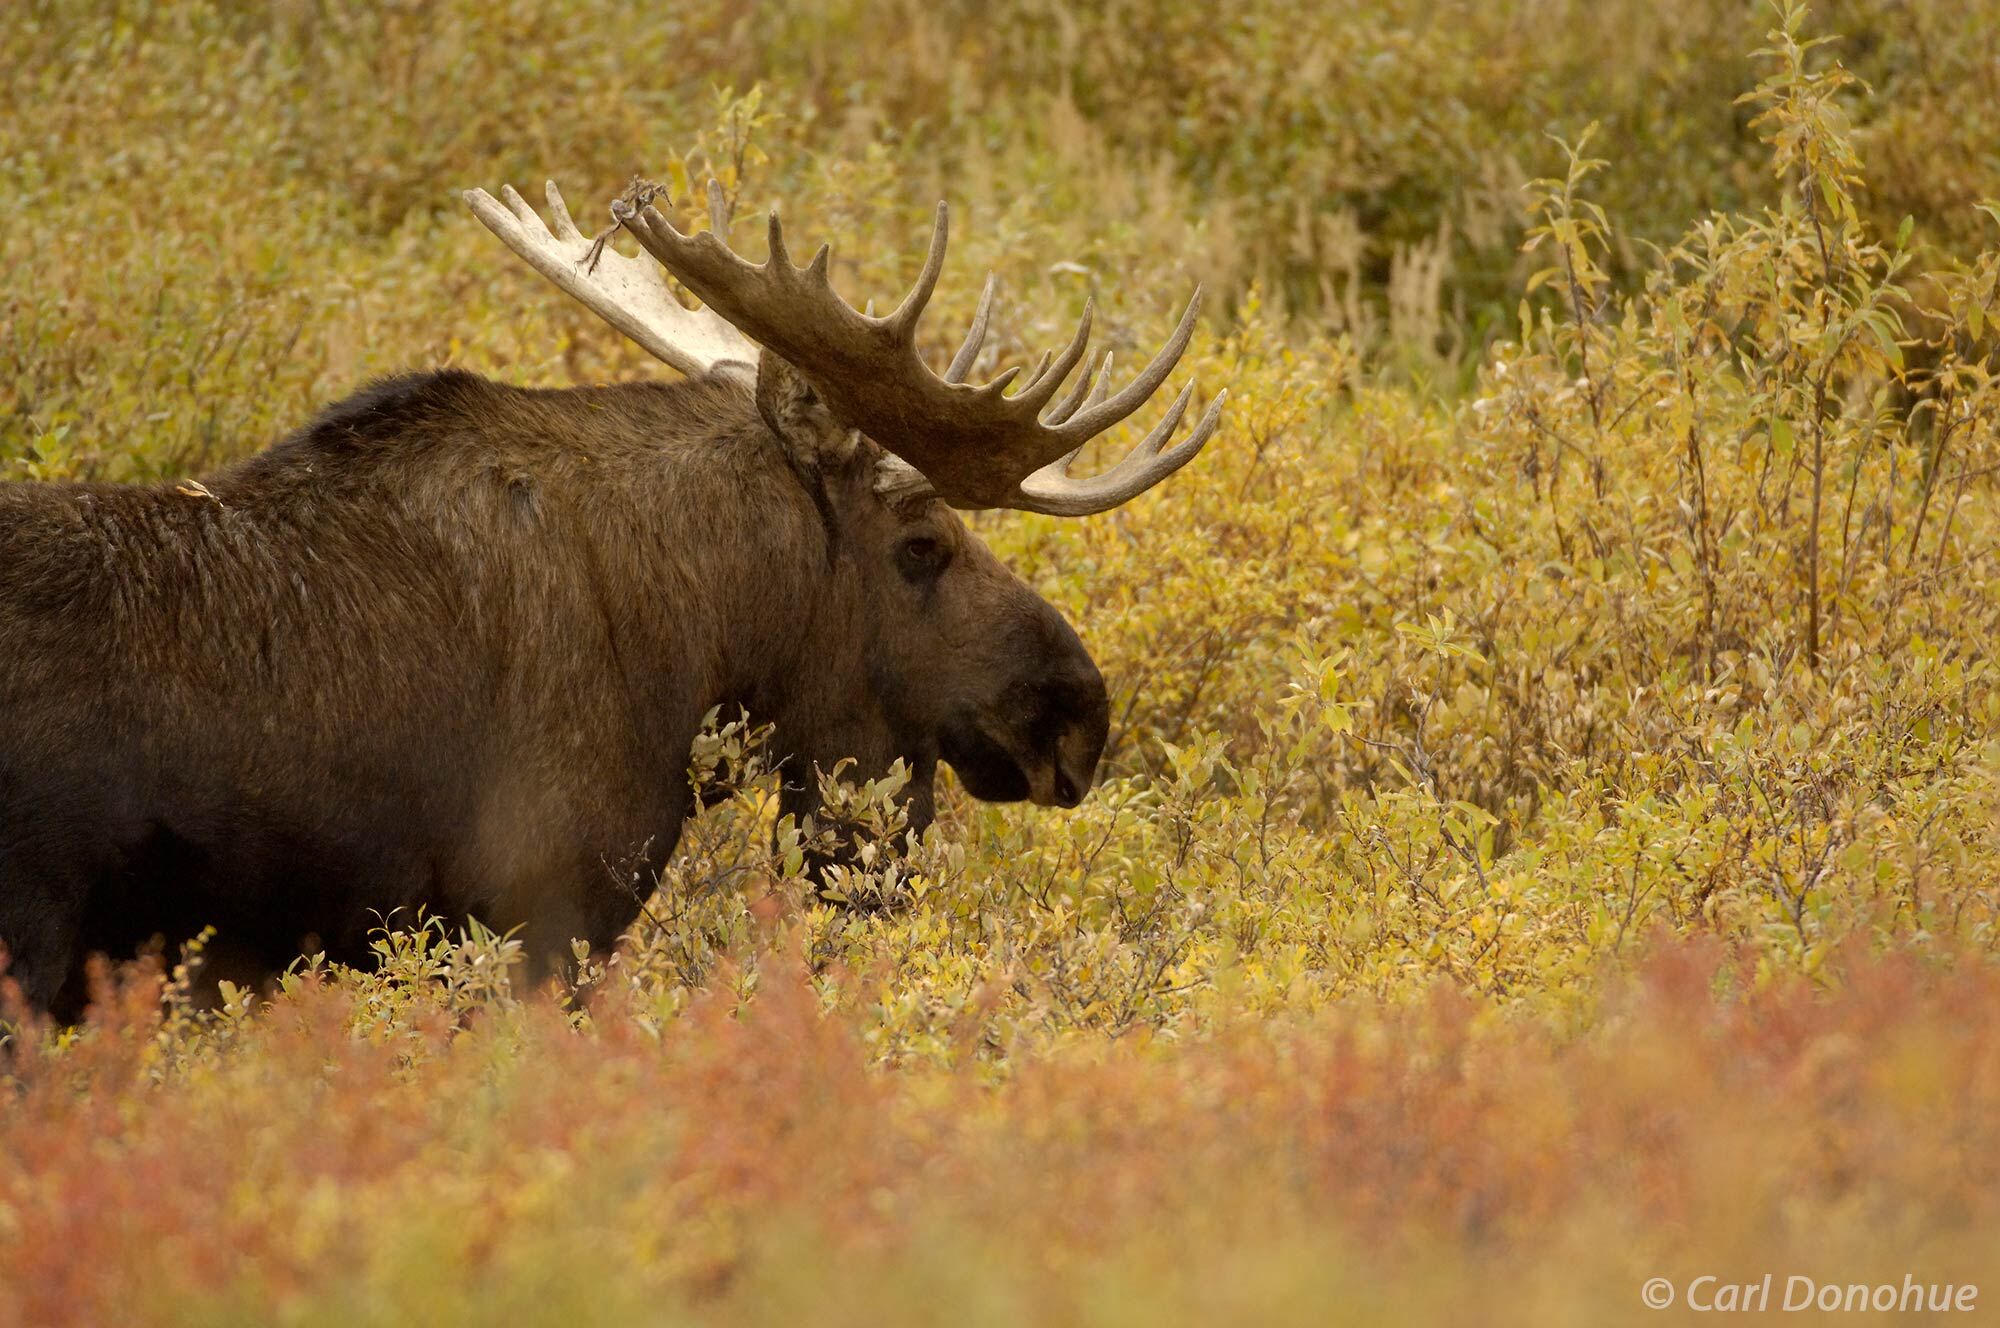 Fall has arrived in Denali National Park, and with it comes the majestic presence of the bull moose. Bull moose is standing on...